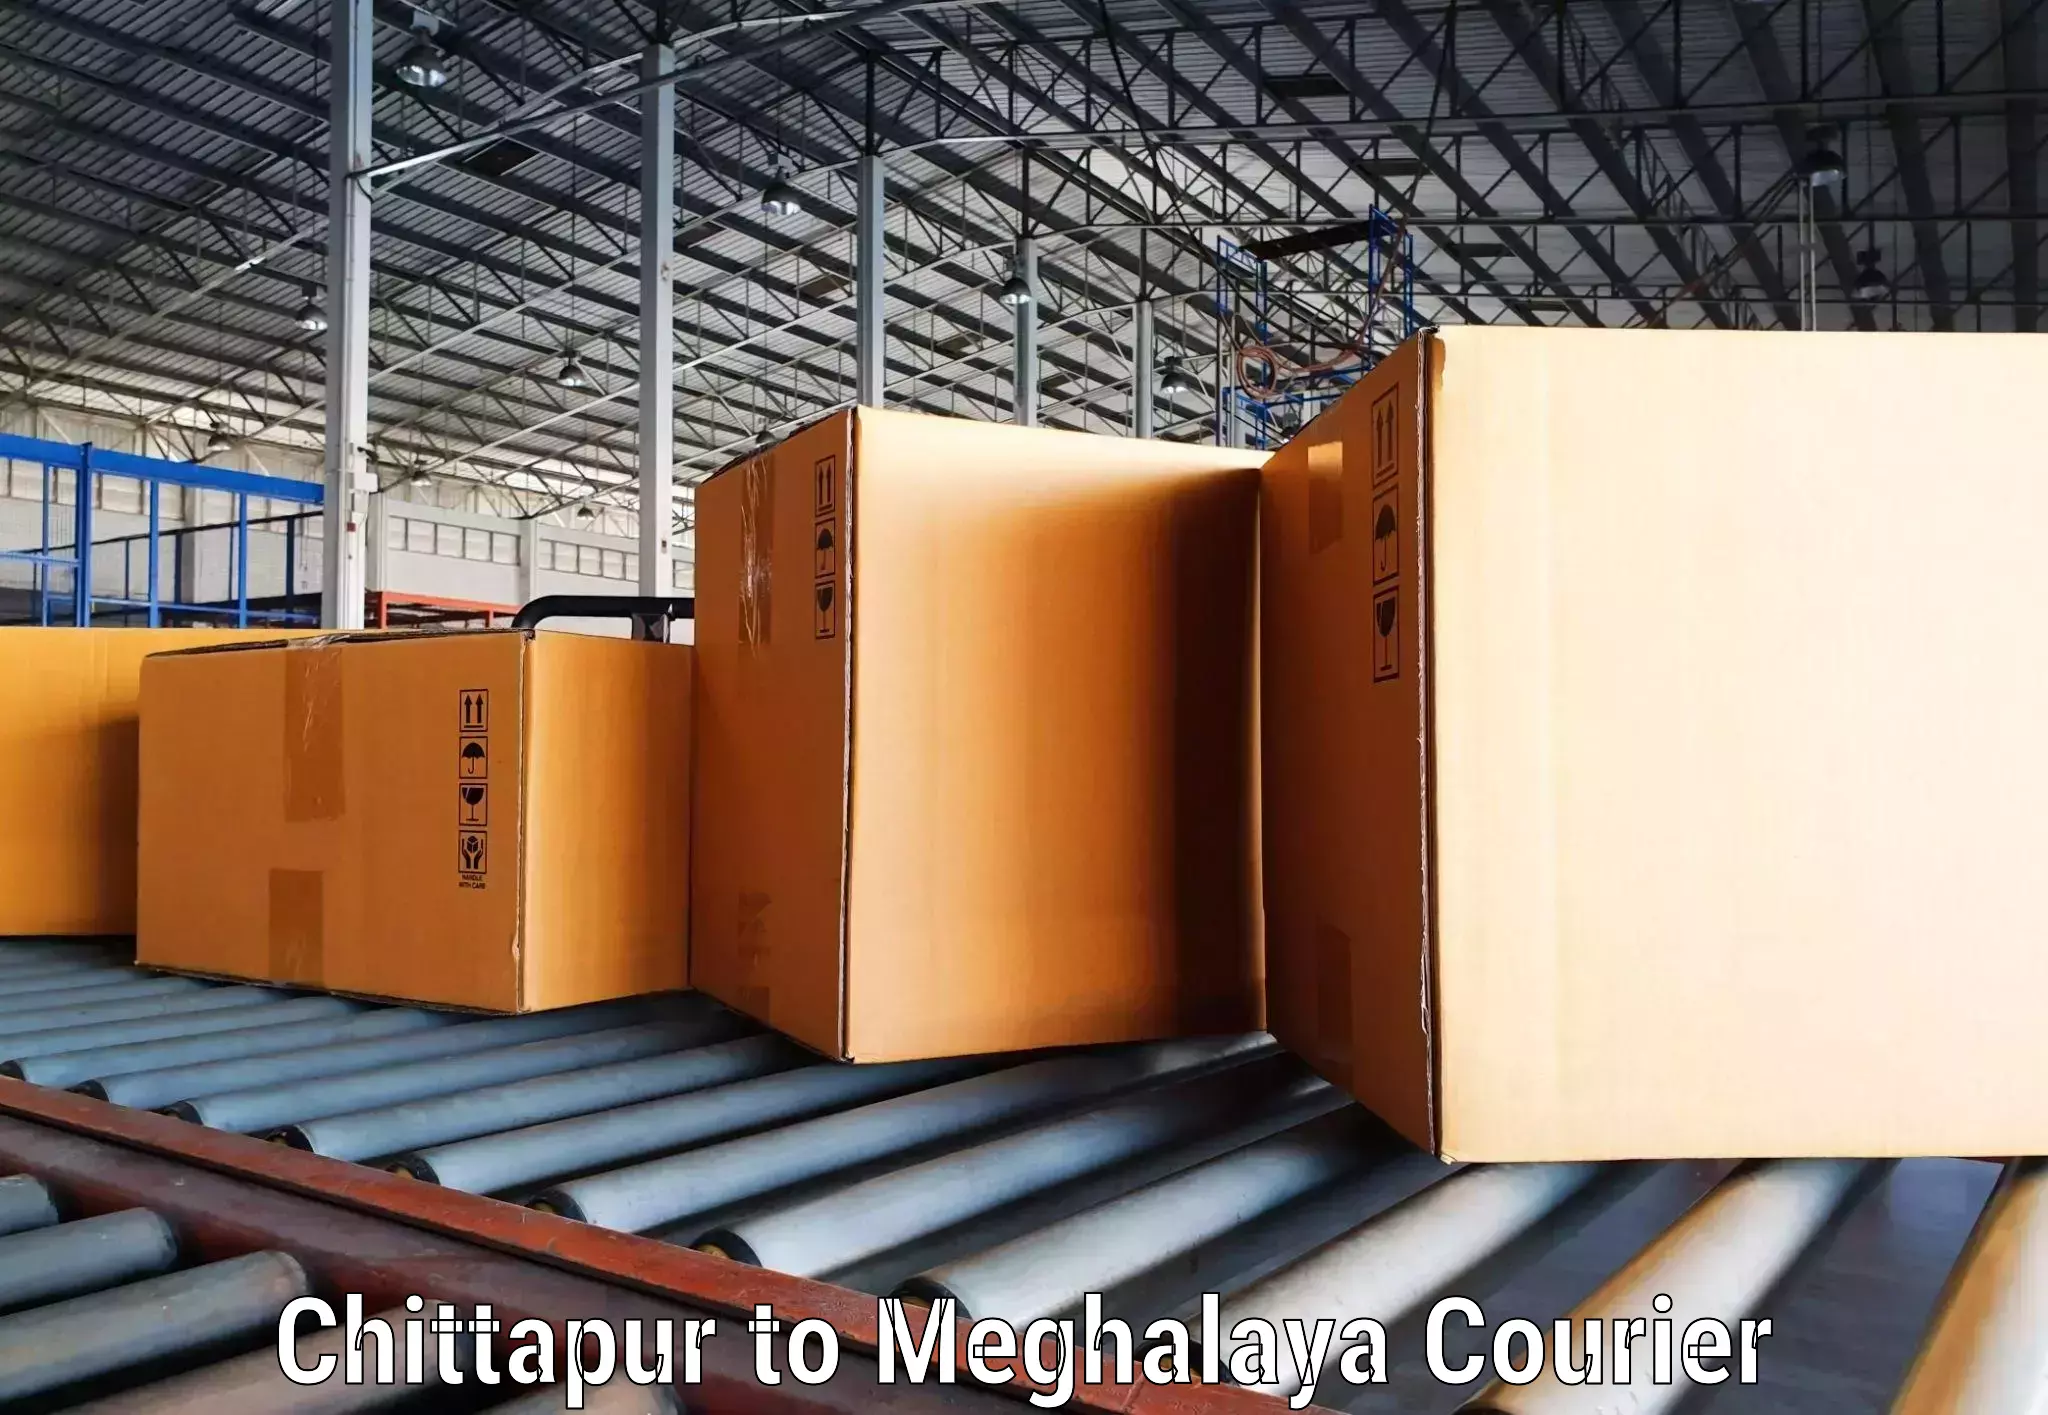 Seamless shipping experience Chittapur to Tura